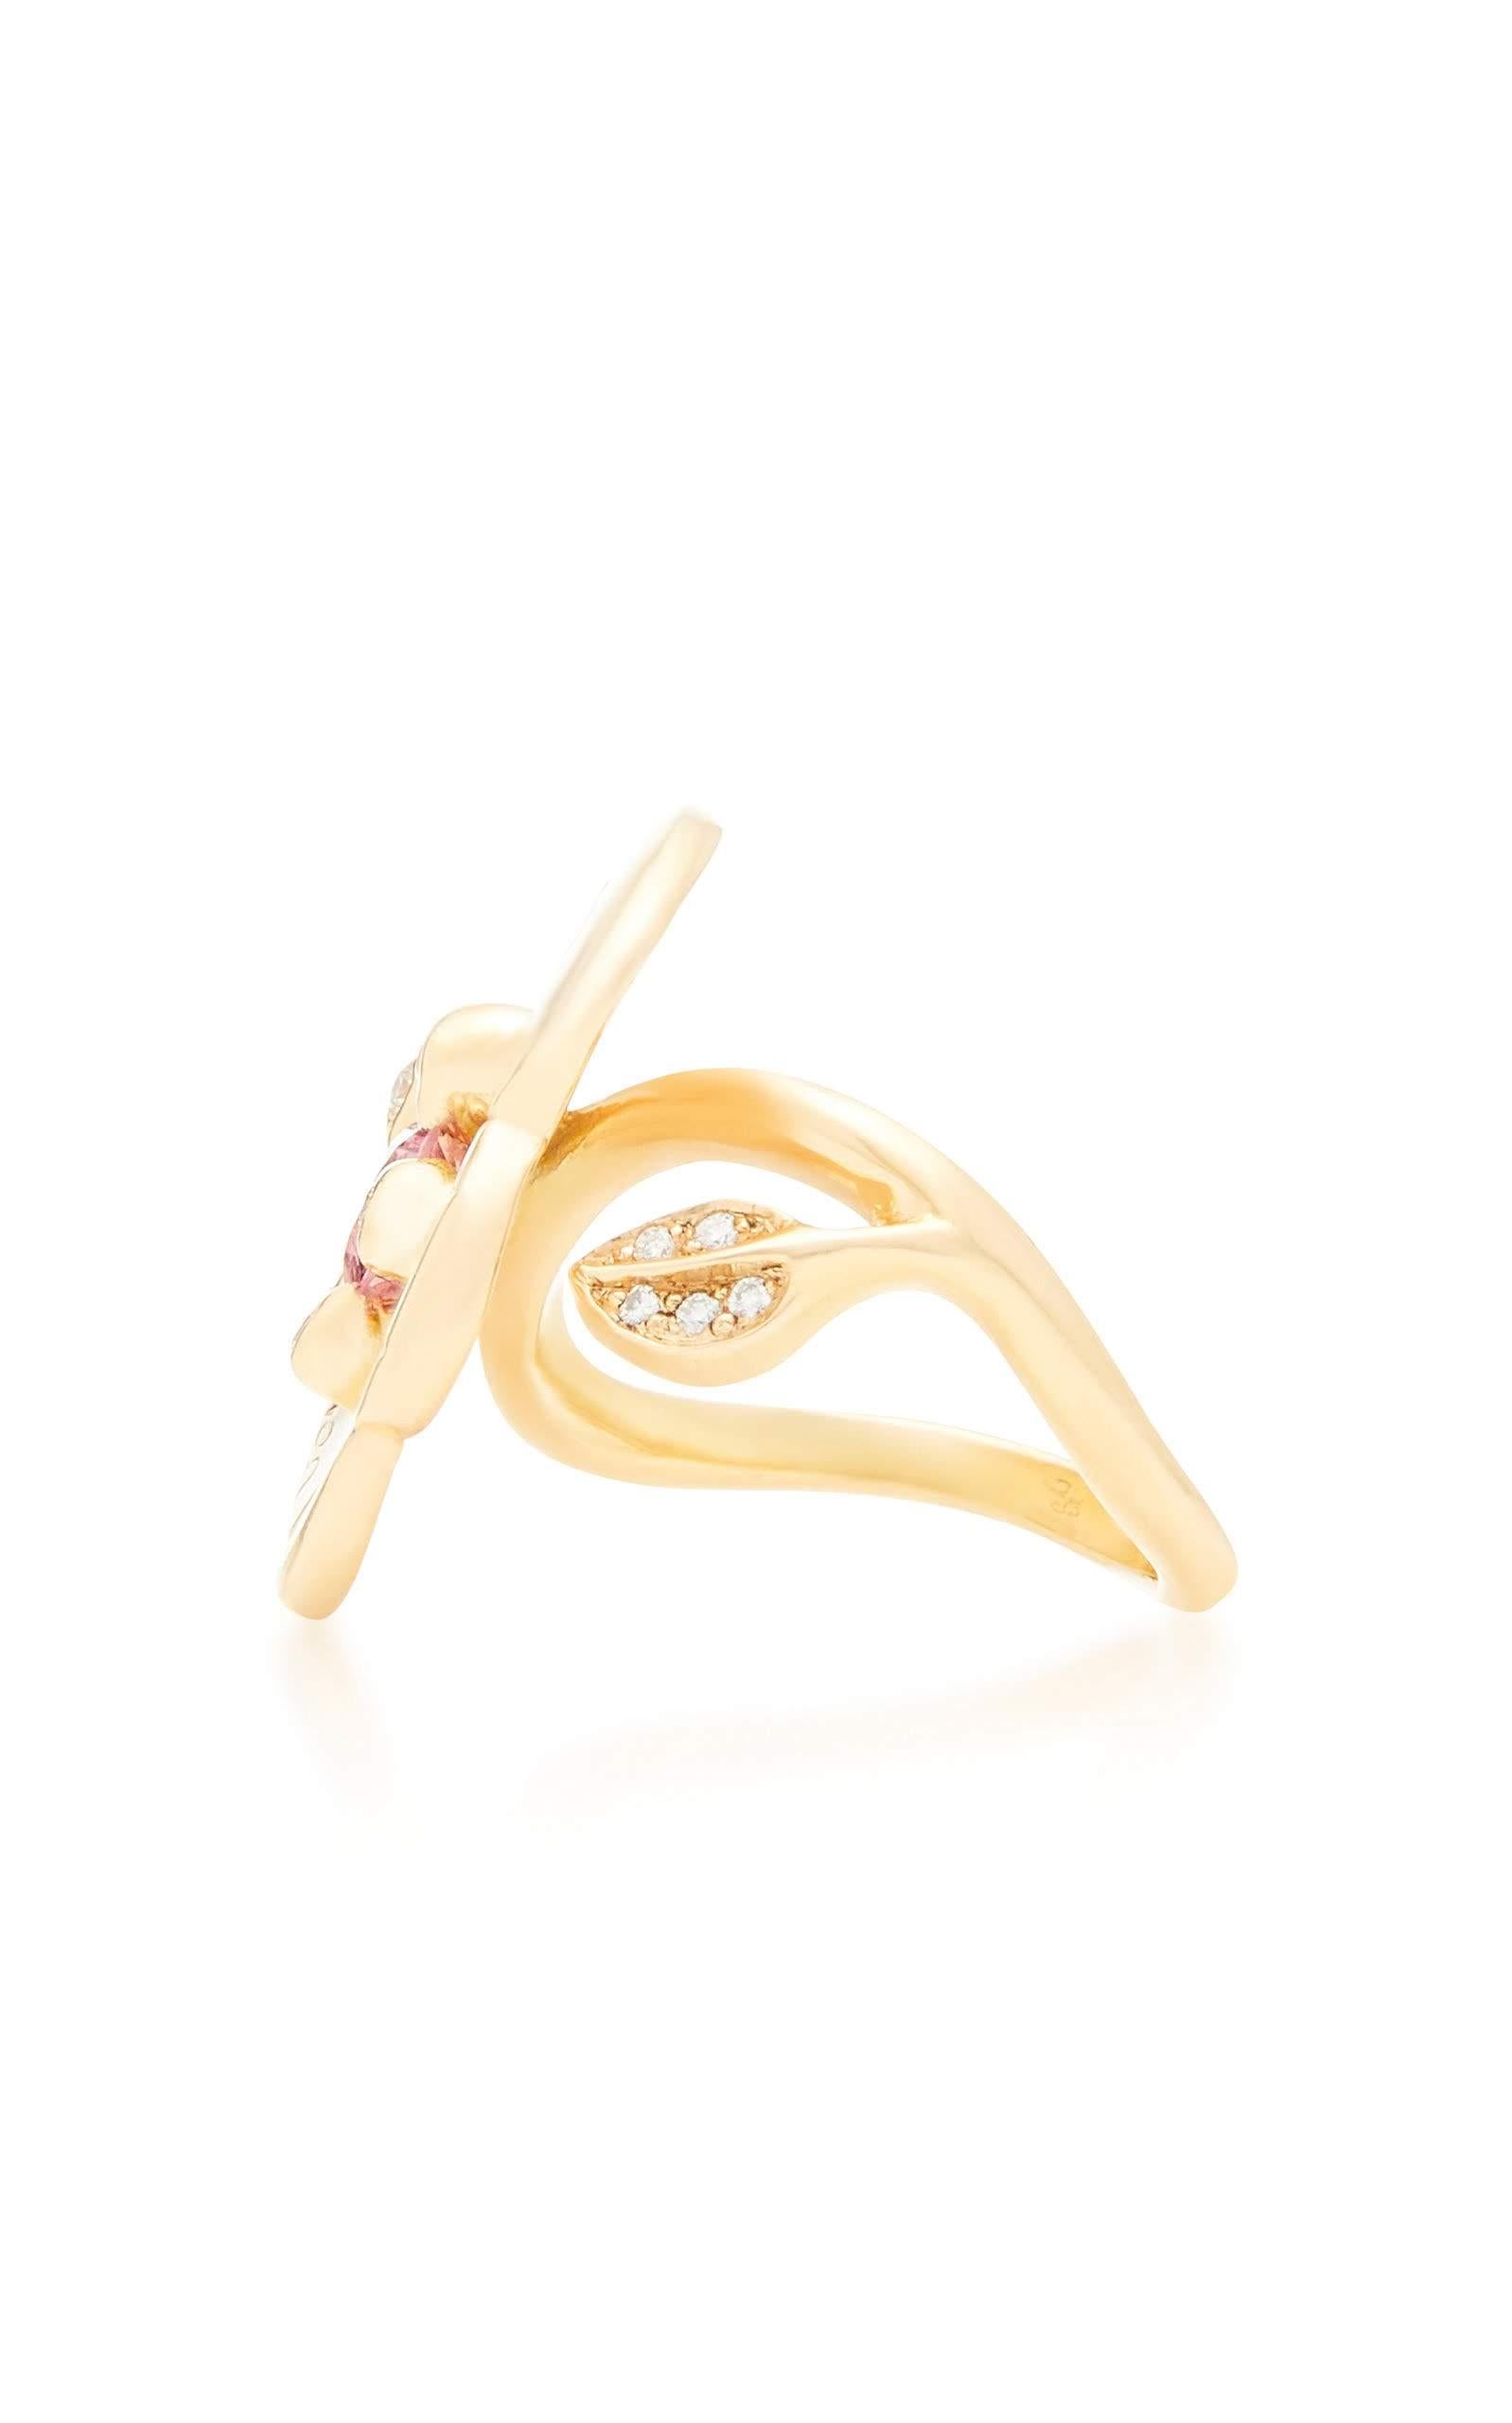 Sylvie Corbelin Limited Edition of an 18K Gold Pansy Ring with Rodholite Garnet For Sale 1